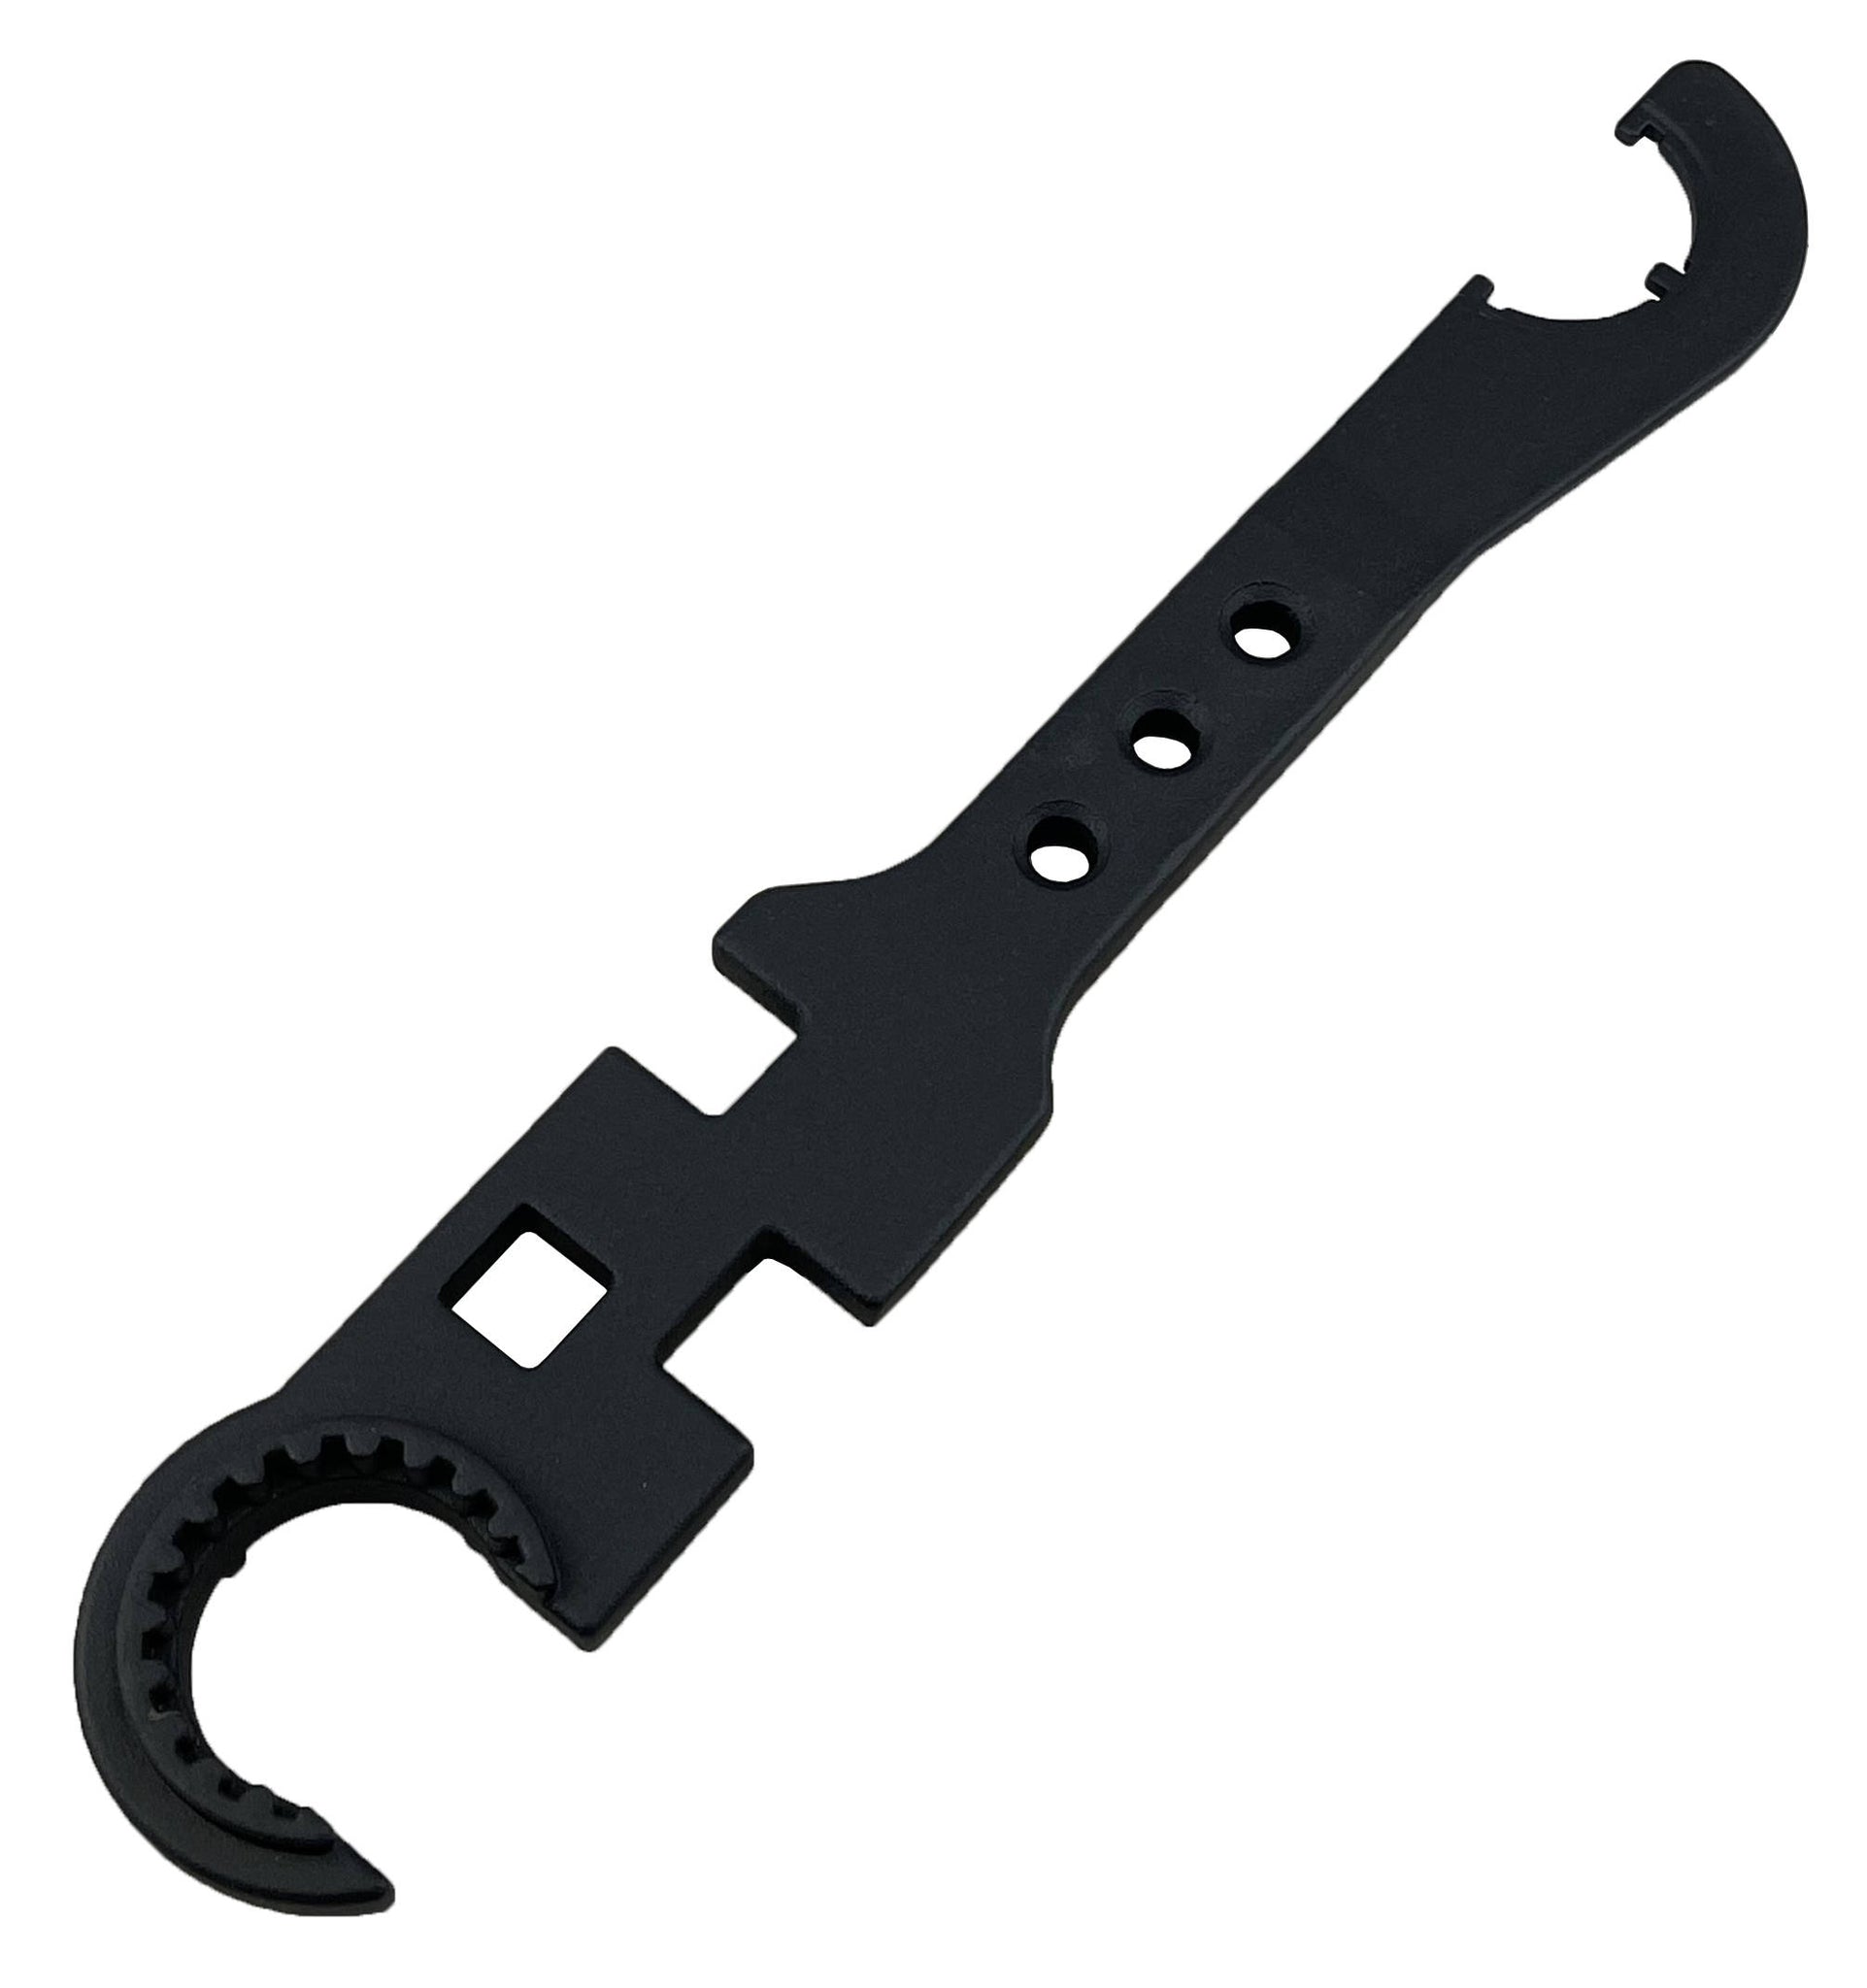 Sports/Fitness: T3 Tactical Multi-Tool $24 (Orig. $40), more